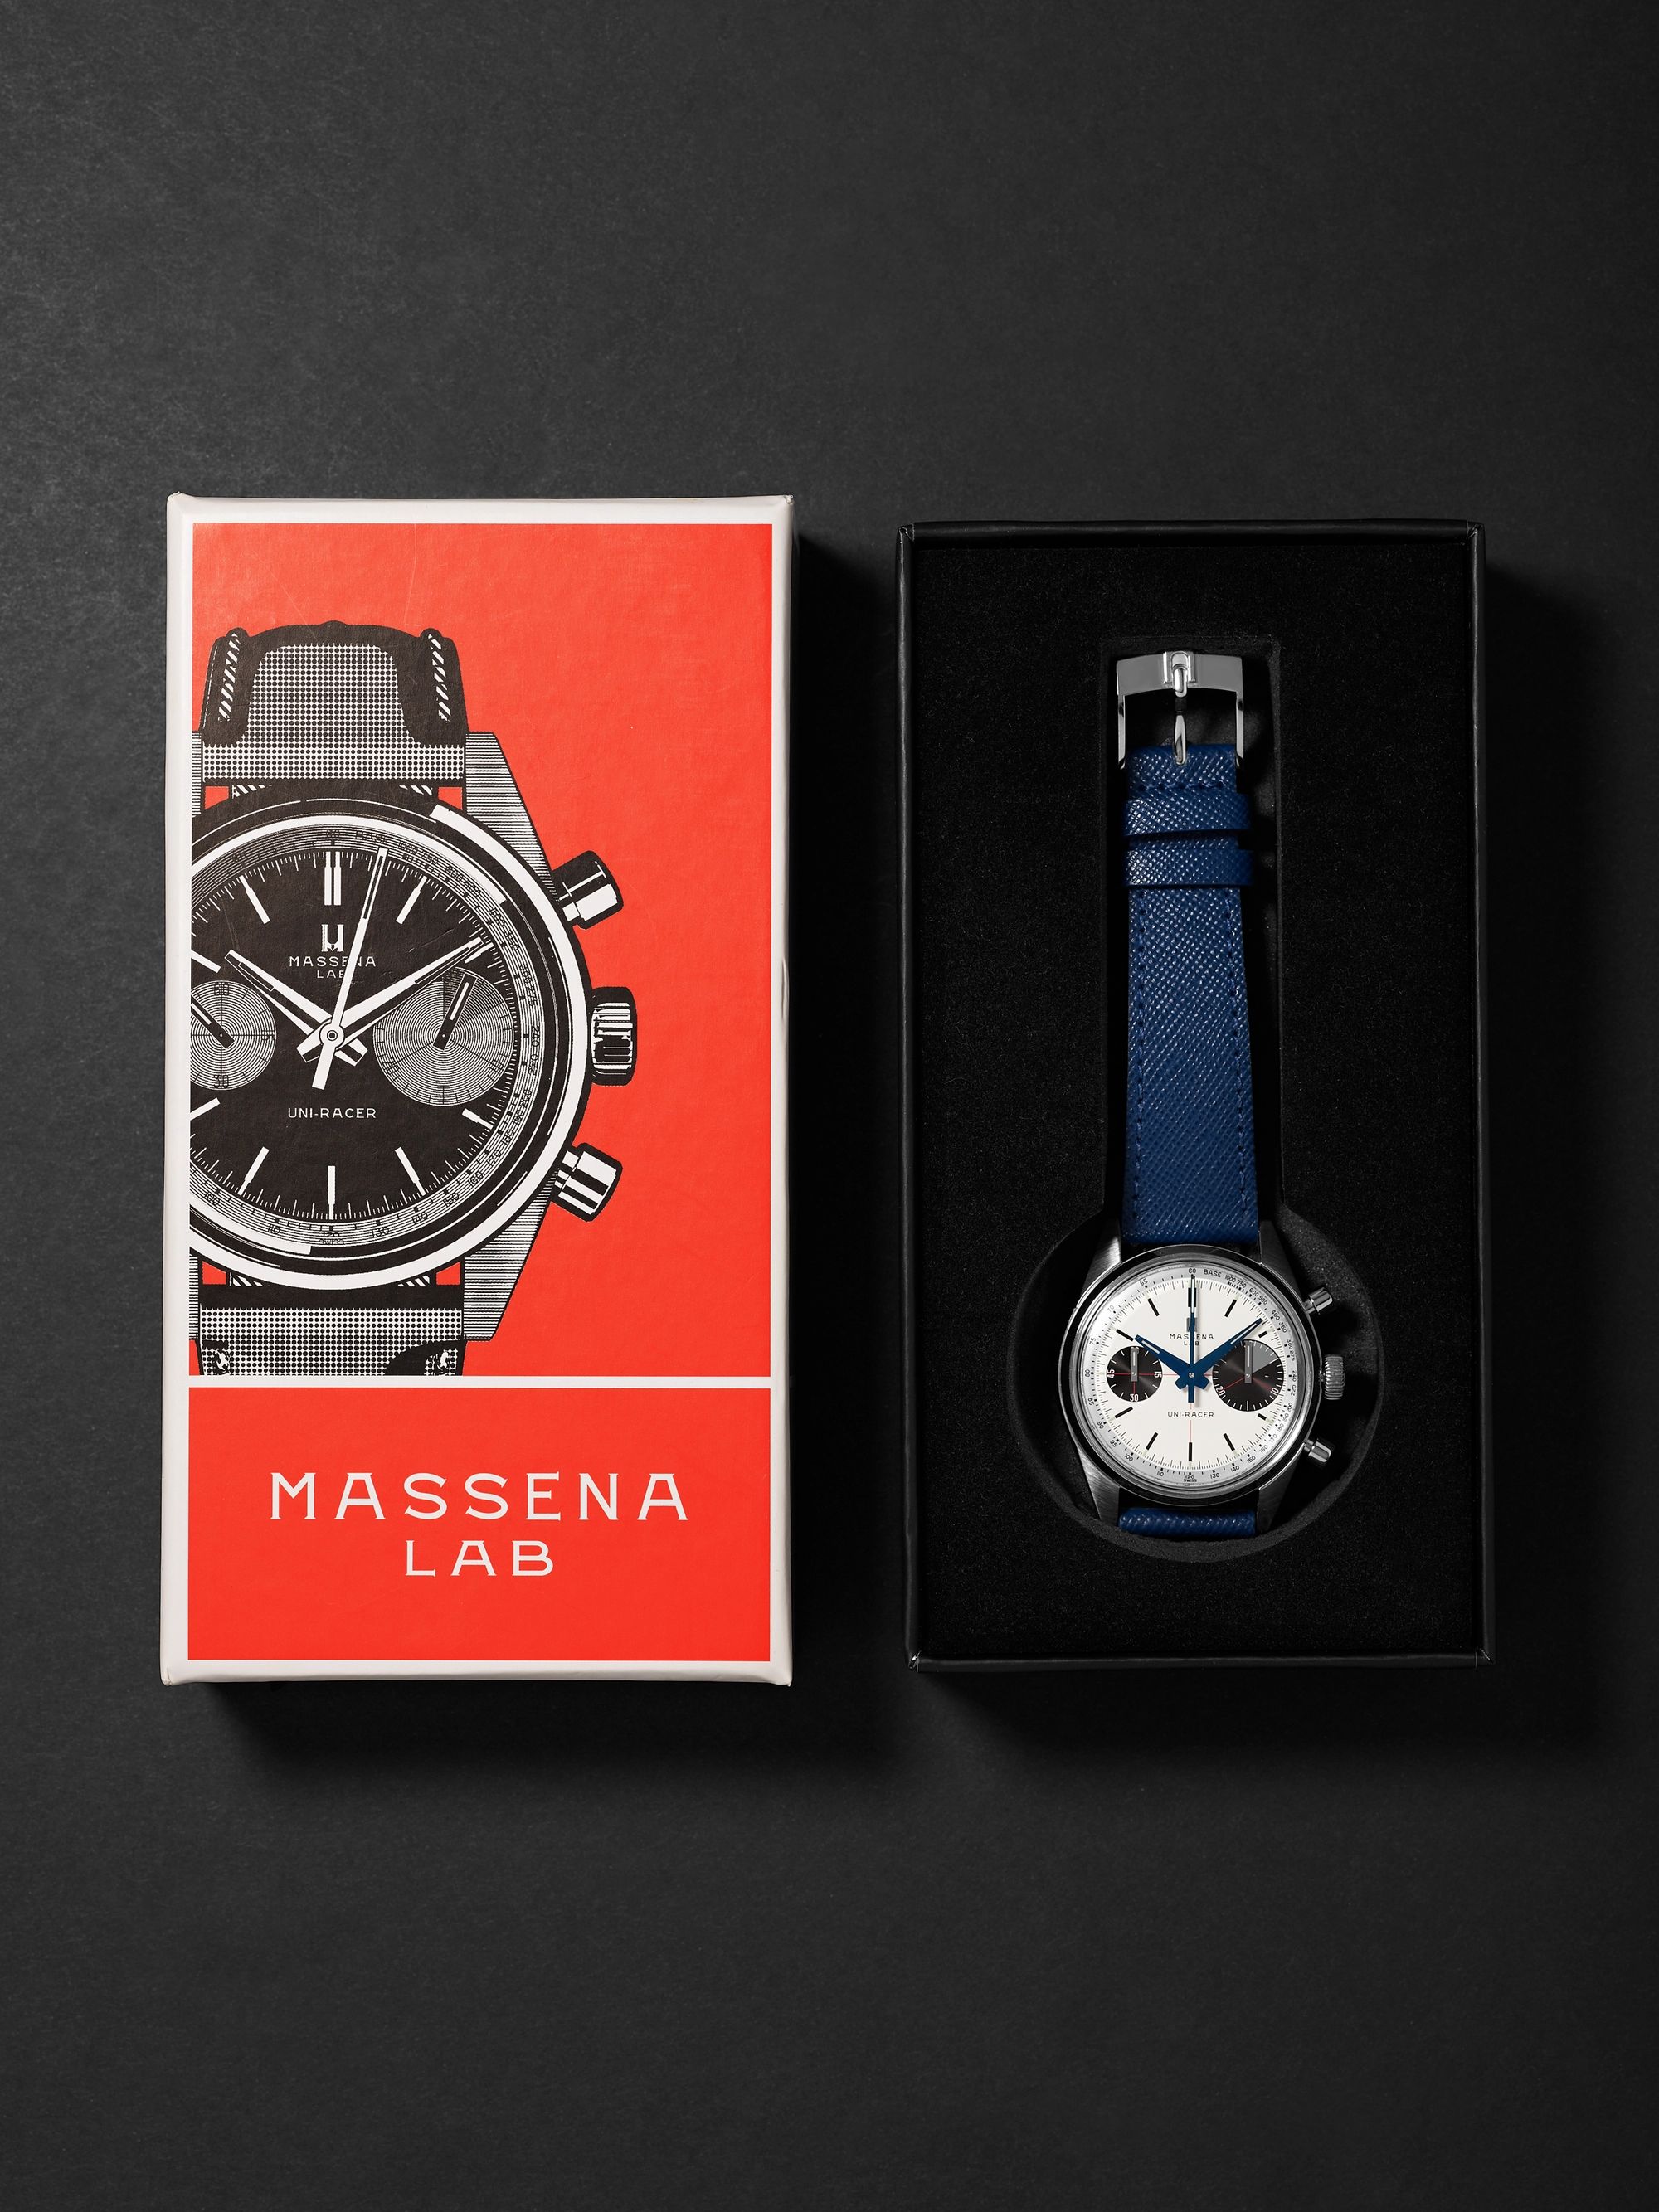 MASSENA LAB Uni-Racer Limited Edition Hand-Wound Chronograph 39mm Stainless Steel and Cross-Grain Leather Watch, Ref. No. UR-001